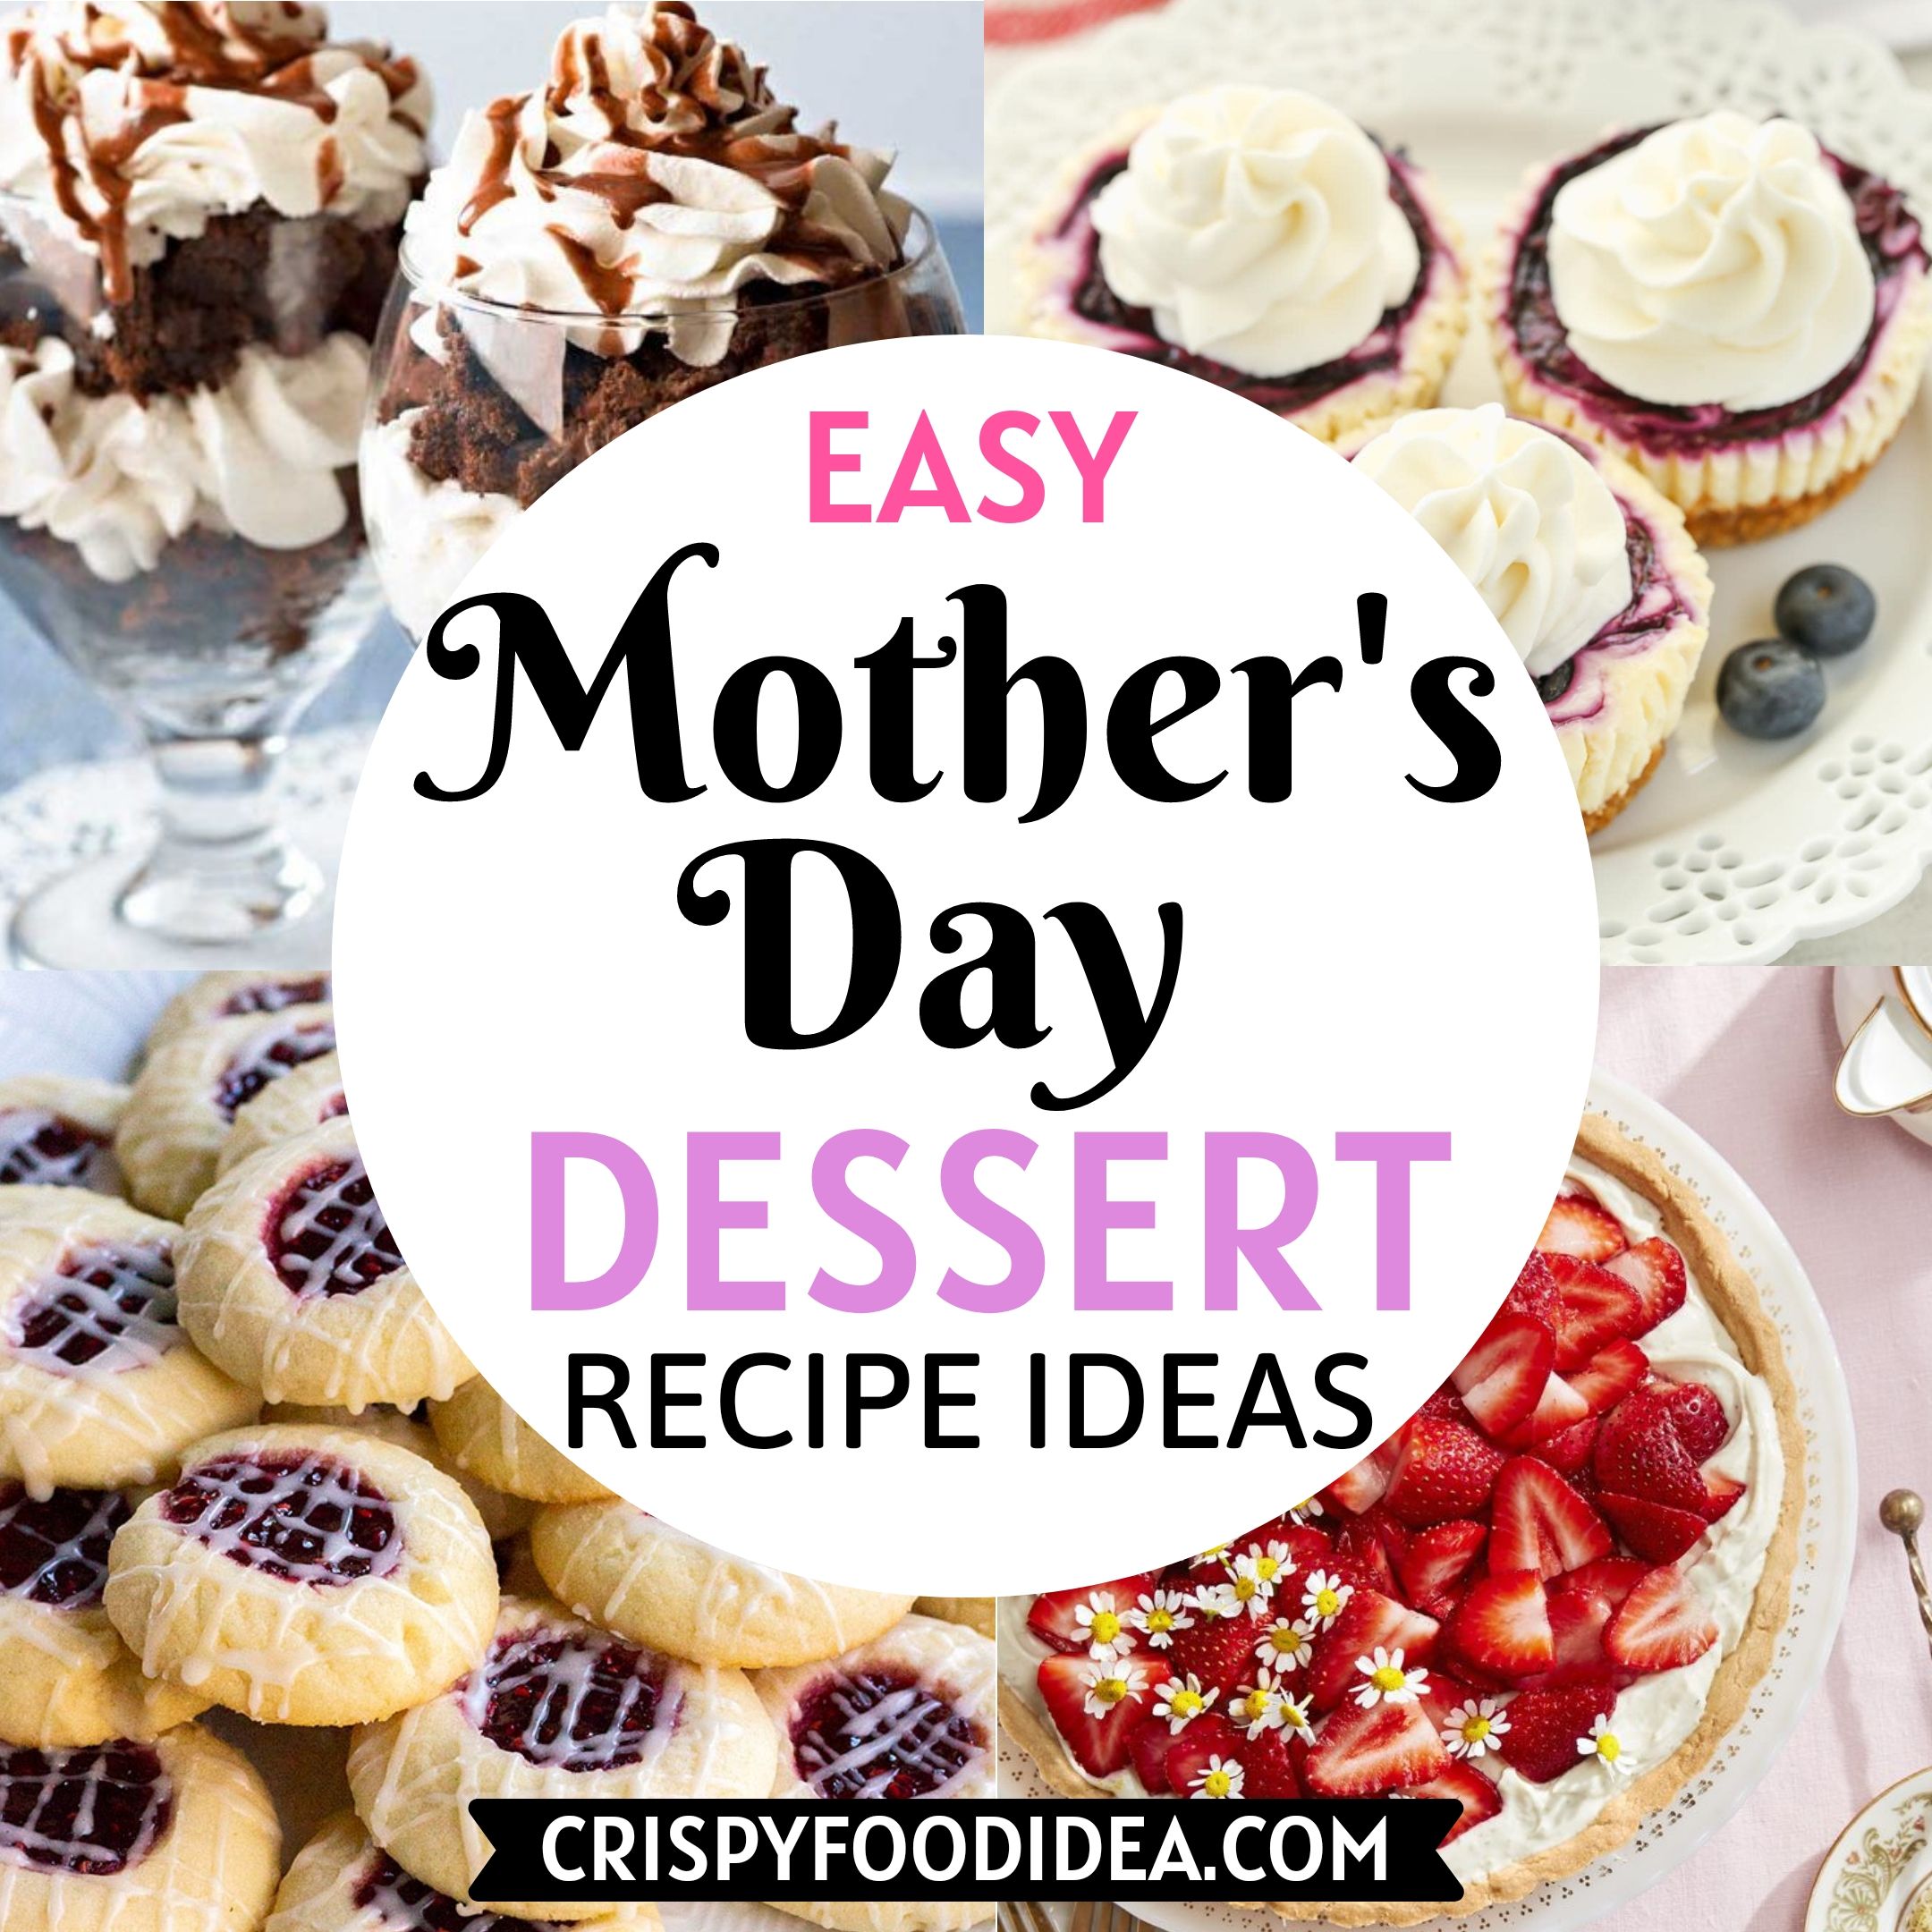 Mother's Day Dessert Recipes.